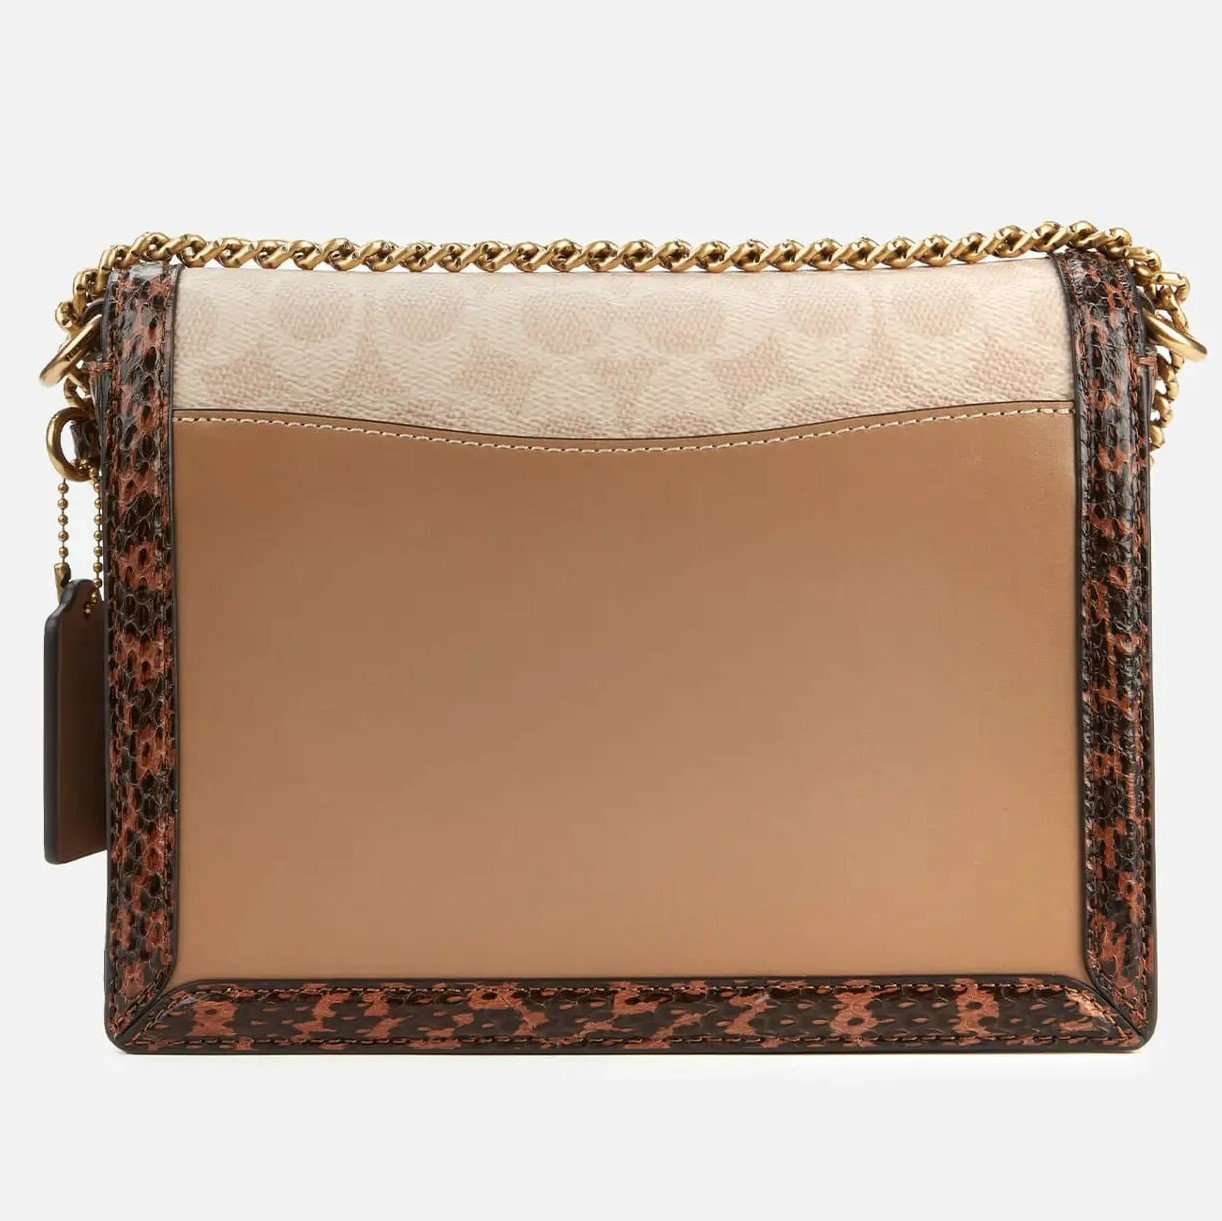 TÚI NỮ COACH HUTTON SHOULDER BAG IN BLOCKED SIGNATURE CANVAS WITH SNAKESKIN DETAIL 14